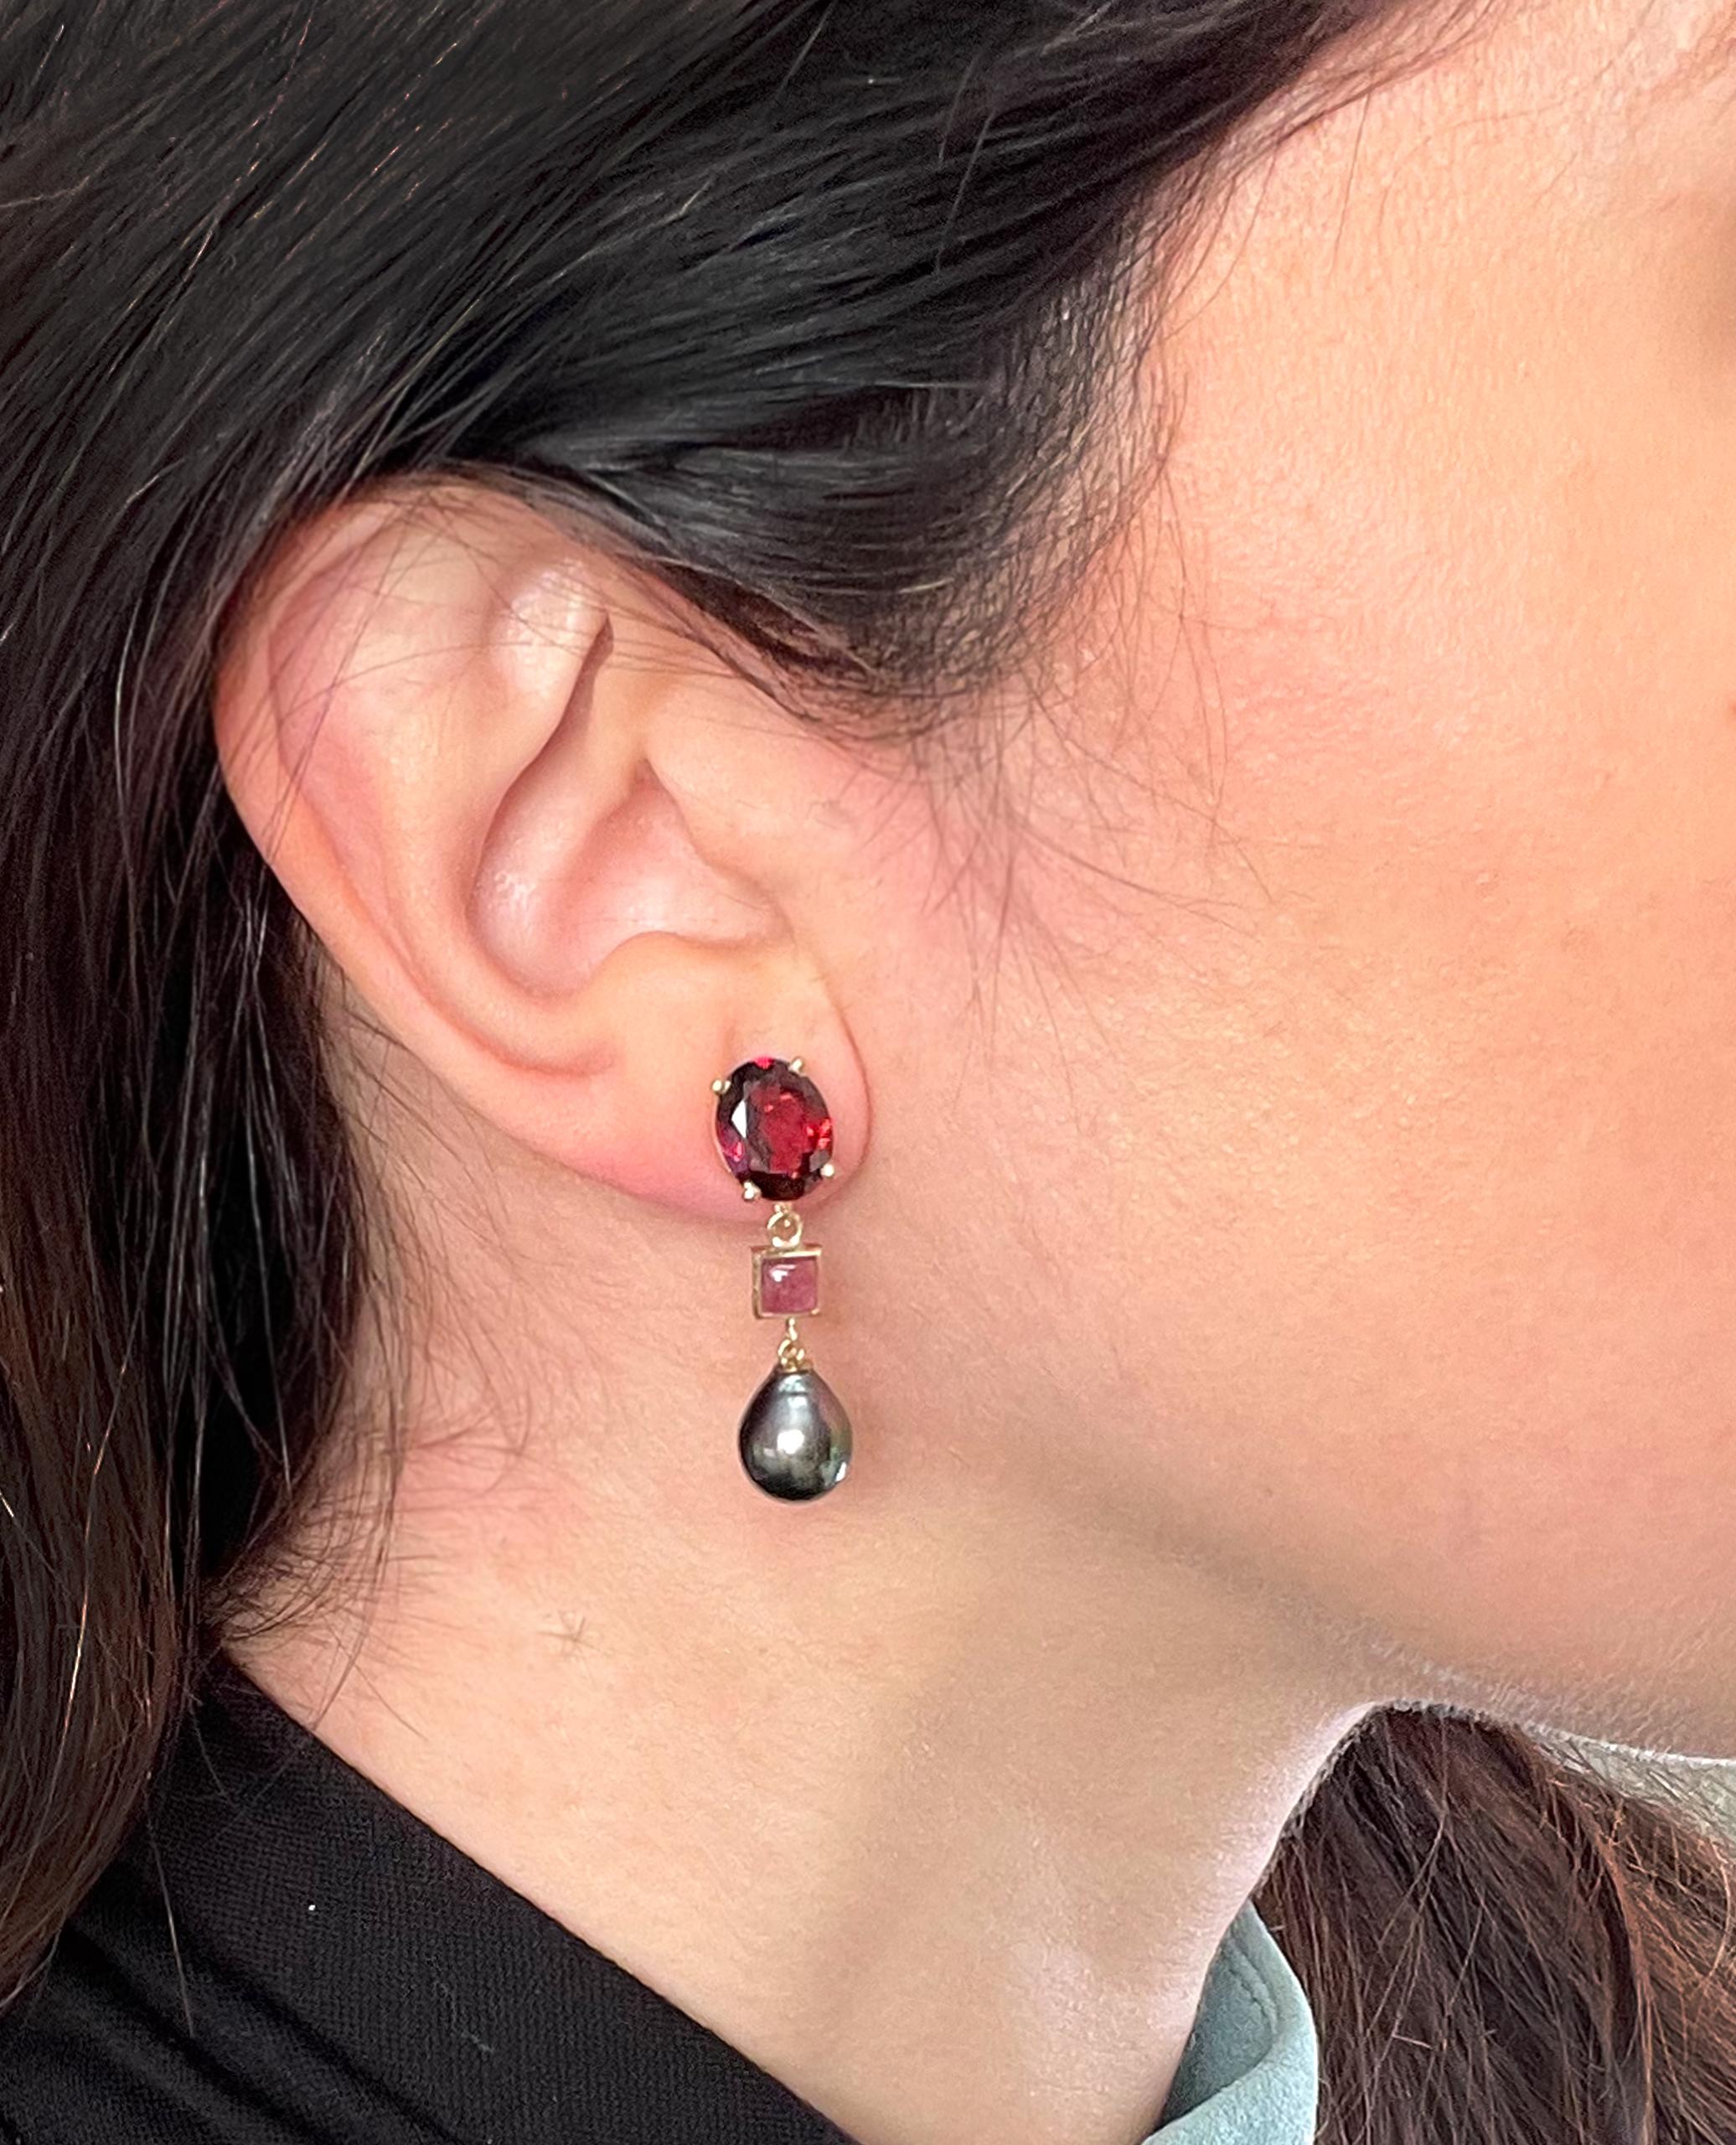 14K yellow gold dangling earrings with two faceted oval garnets weighing 5.02 carats total, two square cabochon pink tourmalines 0.85 carats total  and two baroque black pearls measuring approximately 8.5mm each.